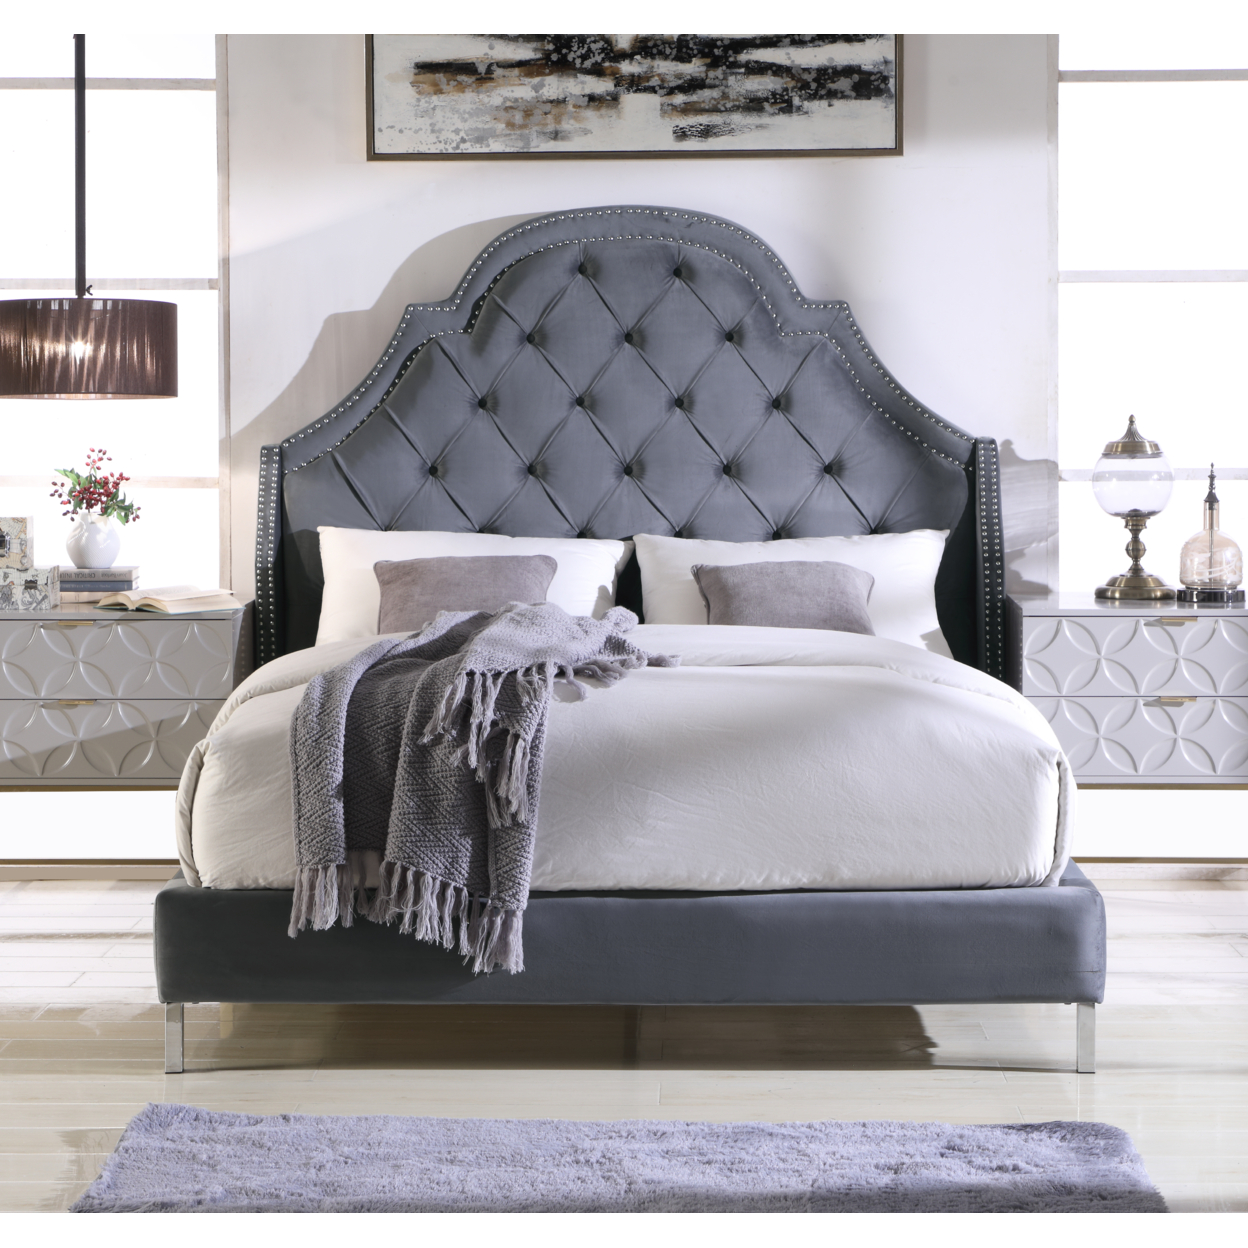 Arthur Bed Frame With Wingback Headboard Velvet Upholstered Button Tufted - Cream, Queen